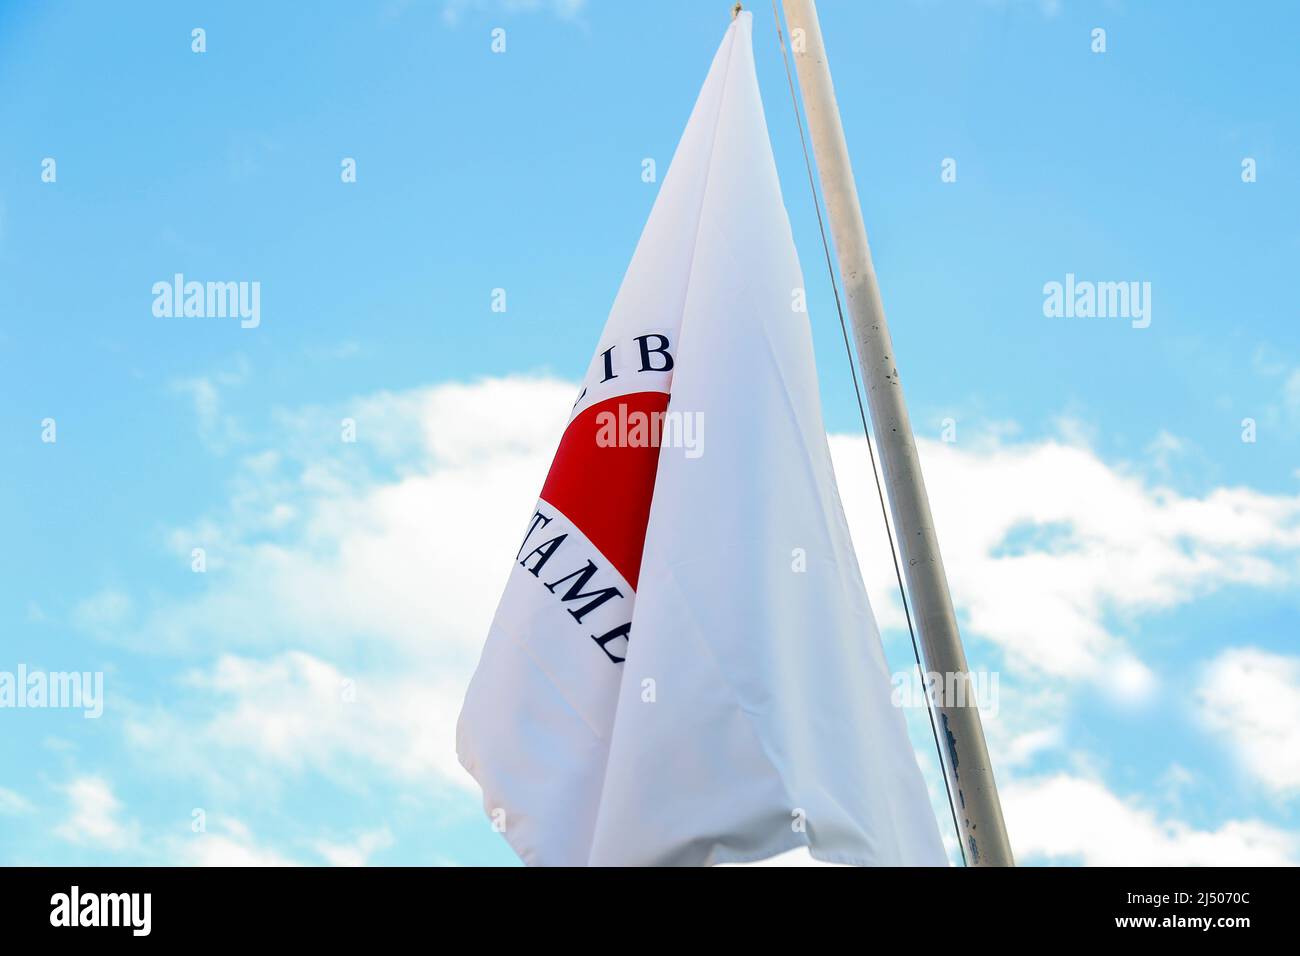 Minas Gerais state flag - red color and horizontal white background - state symbol Stock Photo